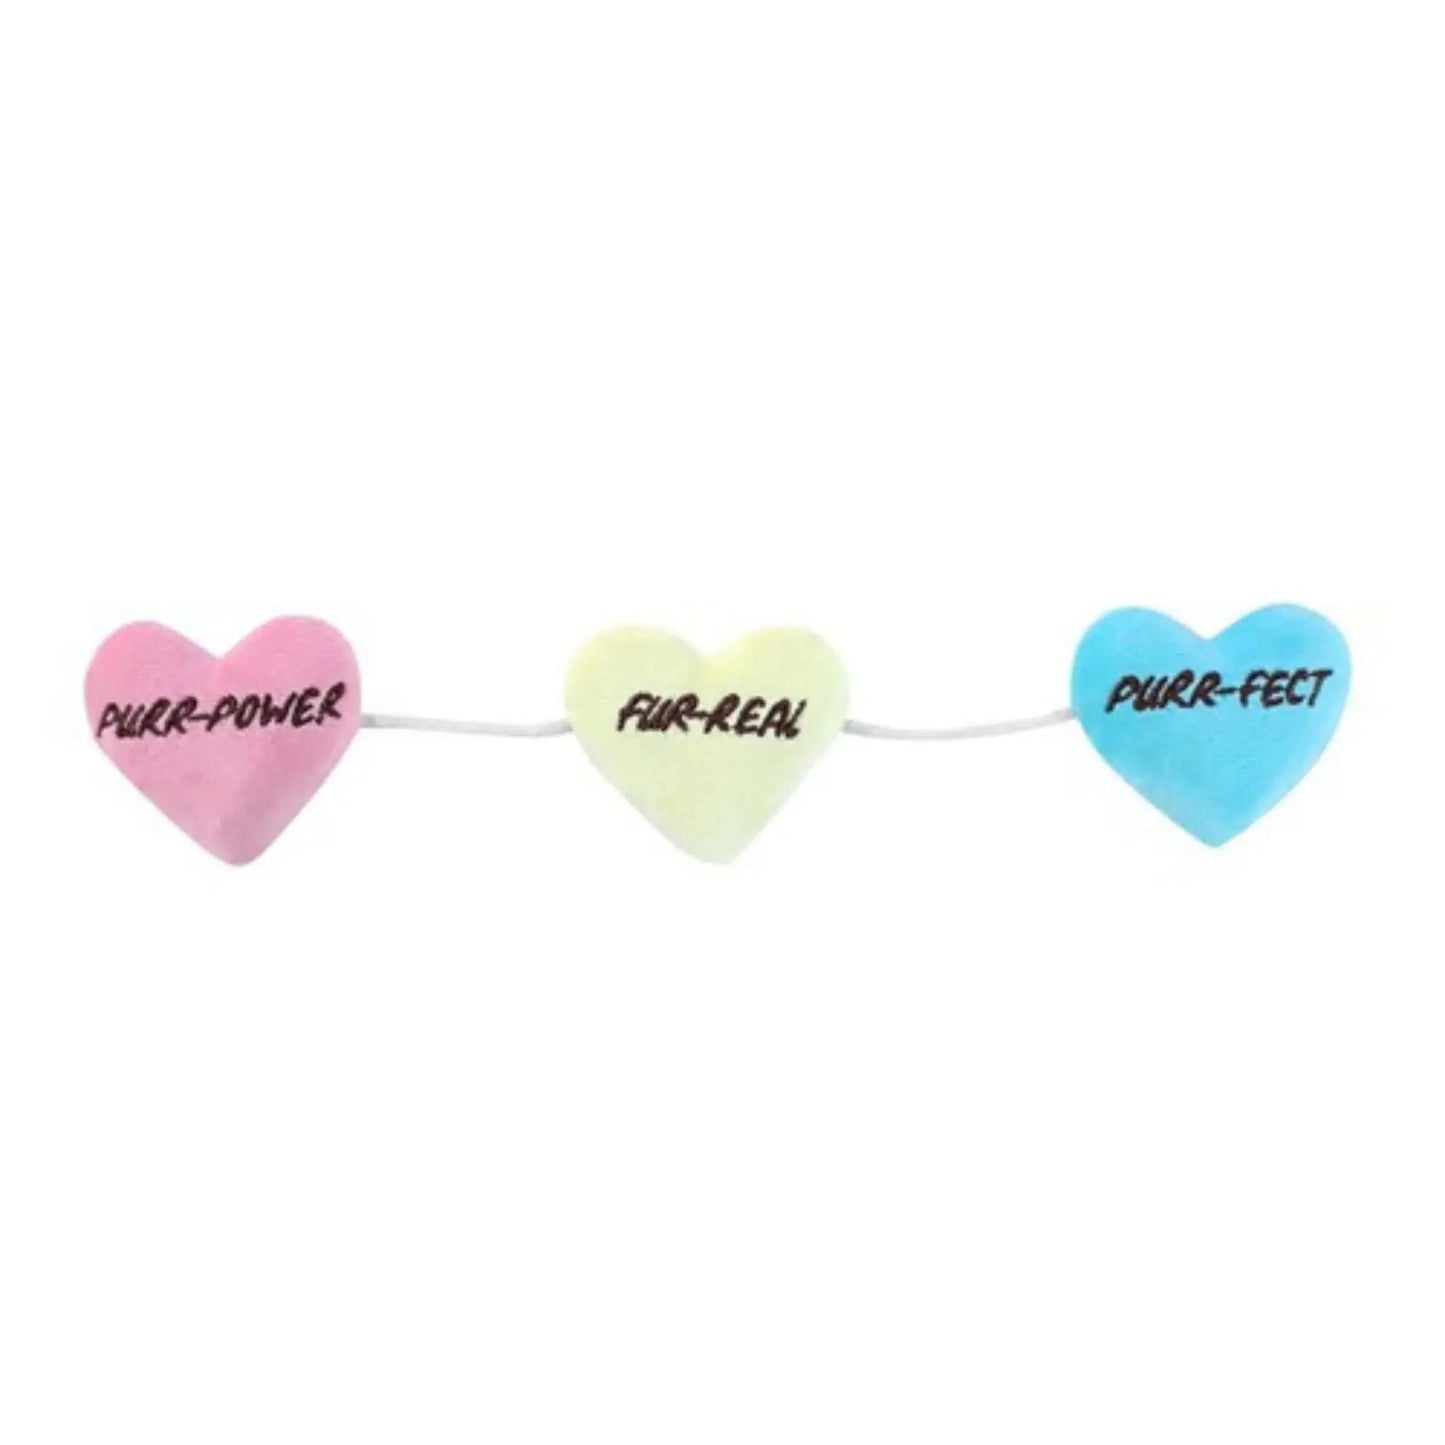 Heart Teaser Cat Toy | Buy Online at DOGUE Australia